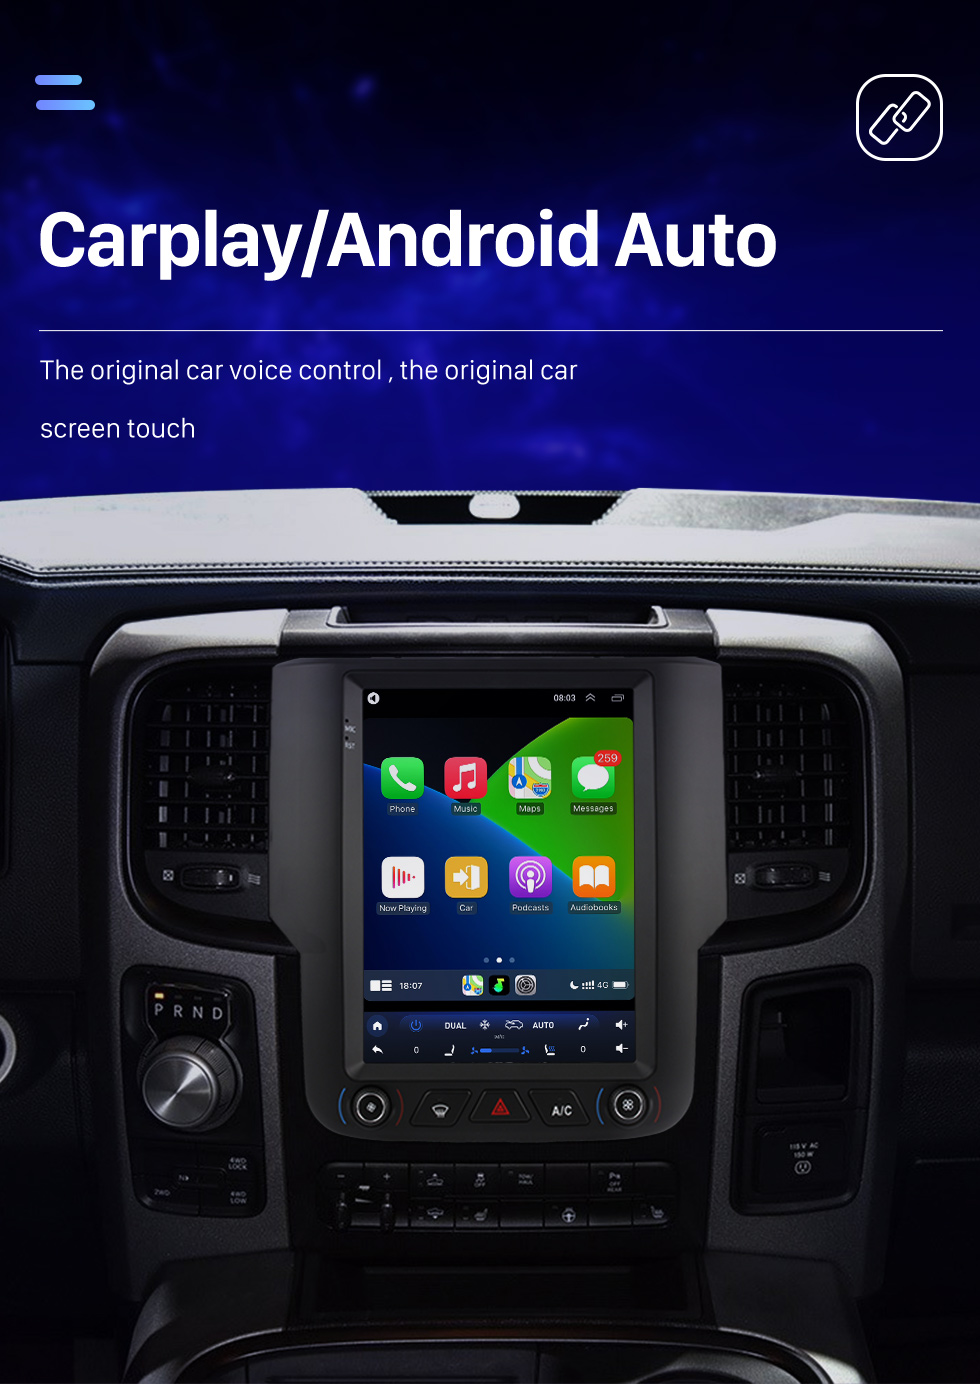 Seicane 9.7 inch Touchscreen Android 10.0 Stereo for 2013-2018 Dodge Ram Aftermarket Radio with Built-in Carplay Bluetooth GPS support Steering Wheel Control